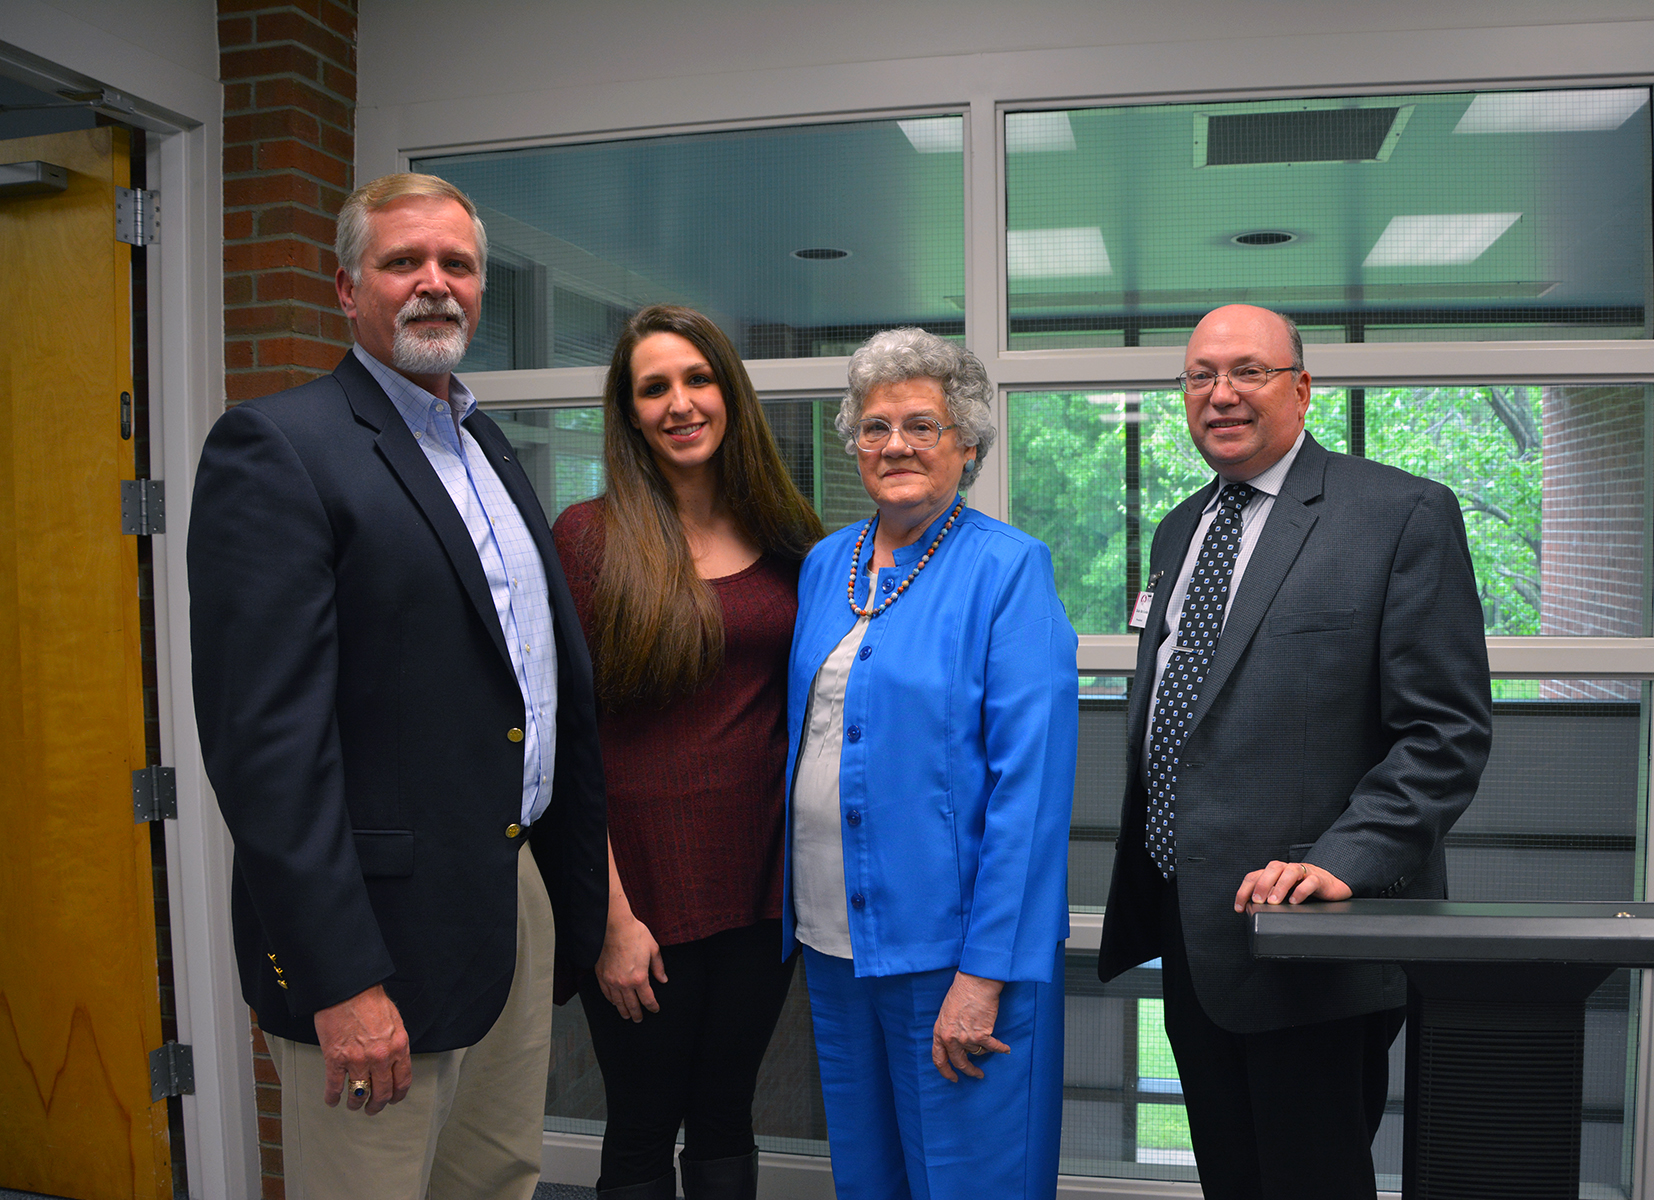 Retired Lt. Col. Ed O’Neal, U.S. Air Force, (left) established the D.R. “Ted” Smith Memorial Scholarship at Richmond Community College. He is pictured with his daughter, Whitney, and Smith’s wife, Peggy, with Dr. Dale McInnis, President of RichmondCC.